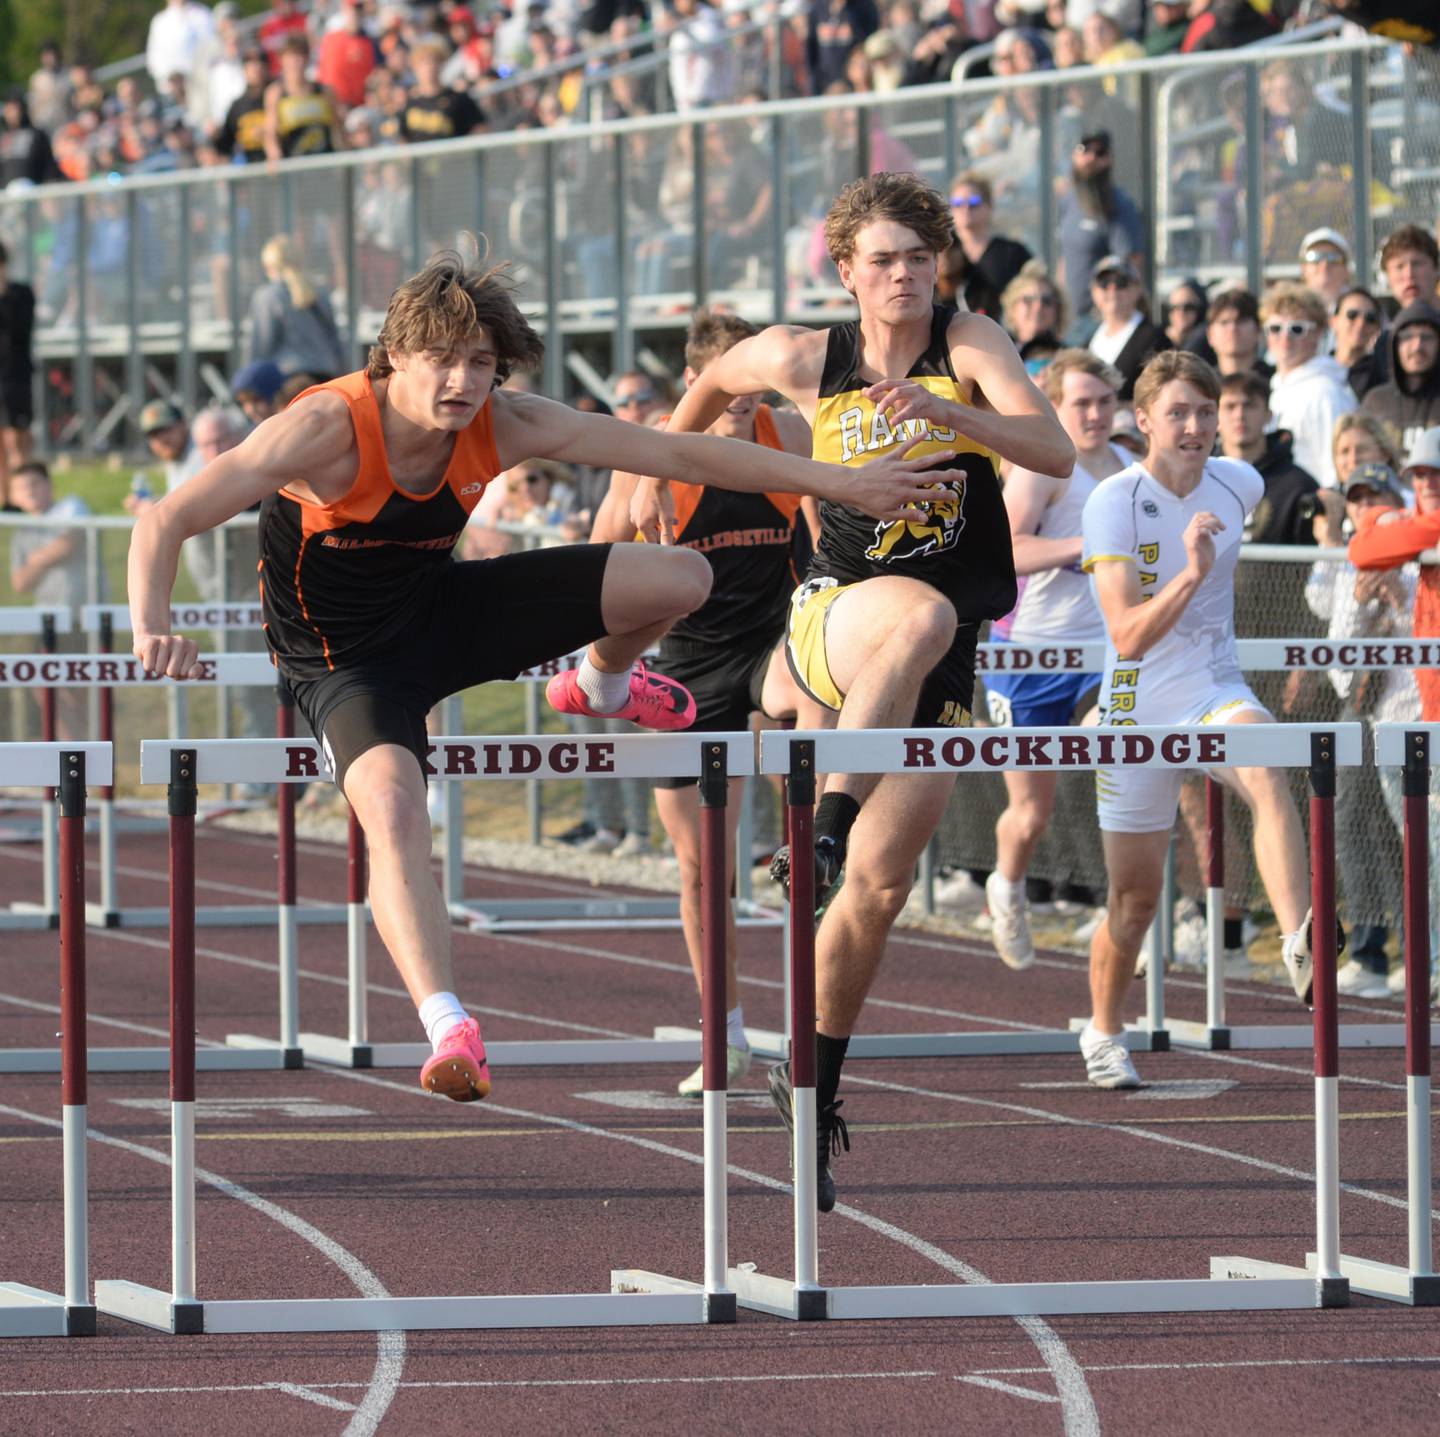 Milledgeville's Kacen Johnson finishes first in the 110 hurdles at the1A Rockridge Sectional on Friday, May 19.